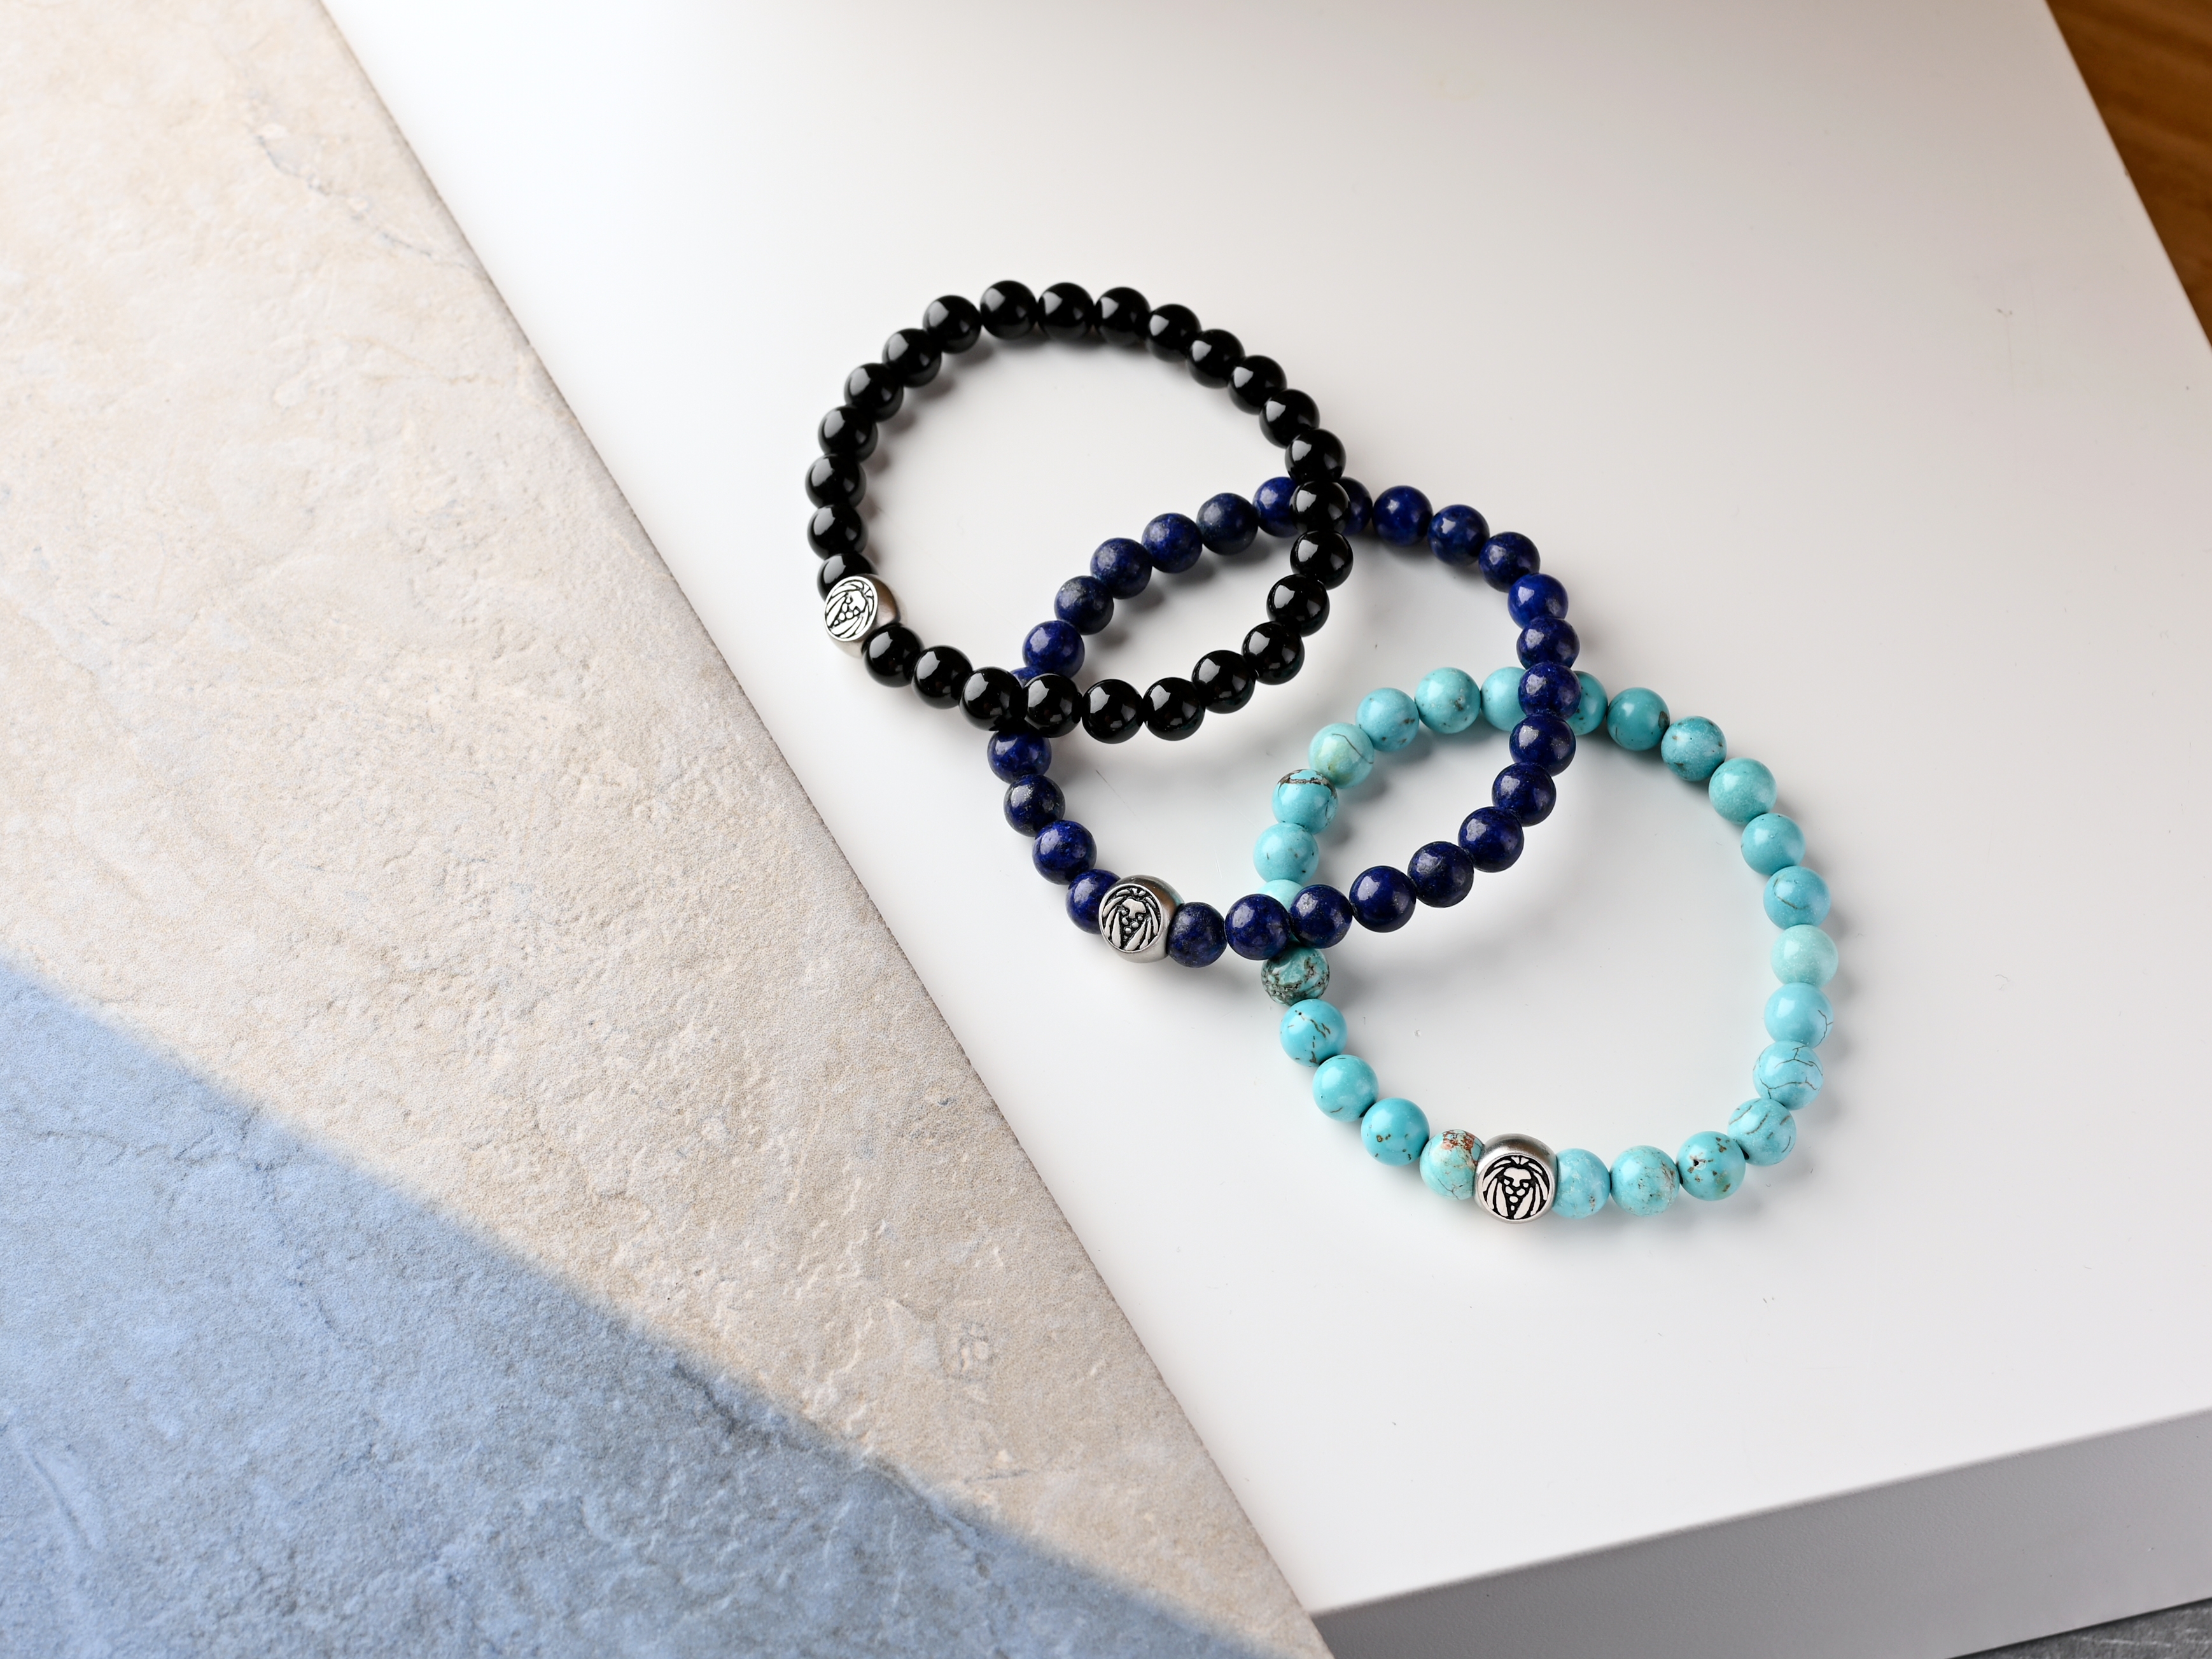 2 Pack of the Blue Swarovski Crystal Bar Bracelet with Black Macrame Cord -  The Patriotic Jewelry Store